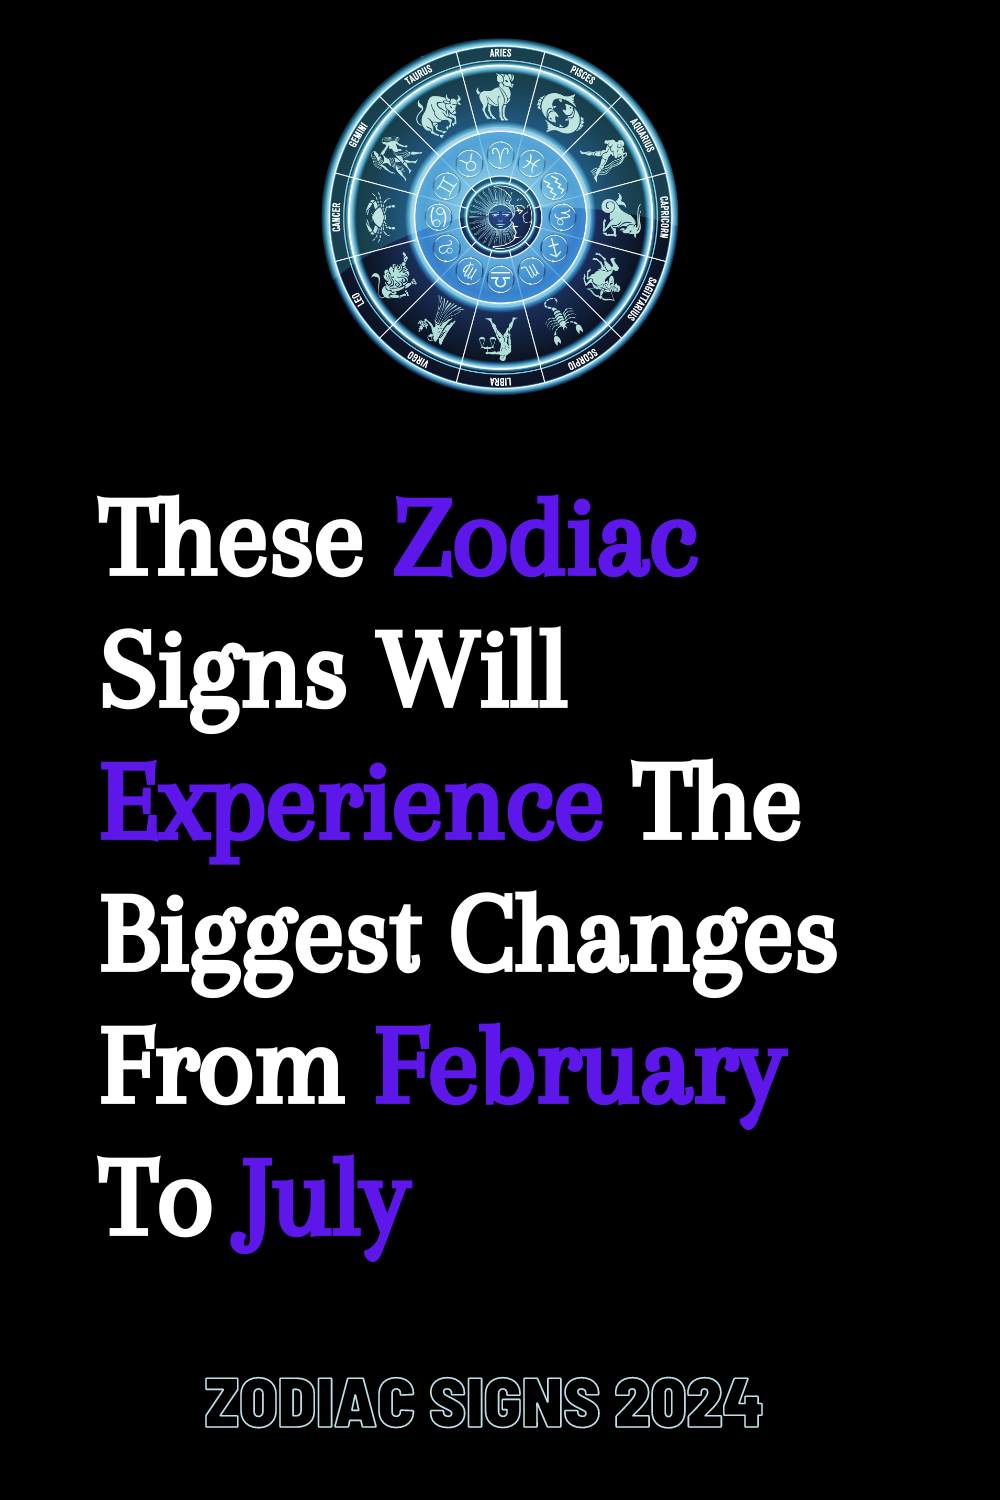 These Zodiac Signs Will Experience The Biggest Changes From February To July